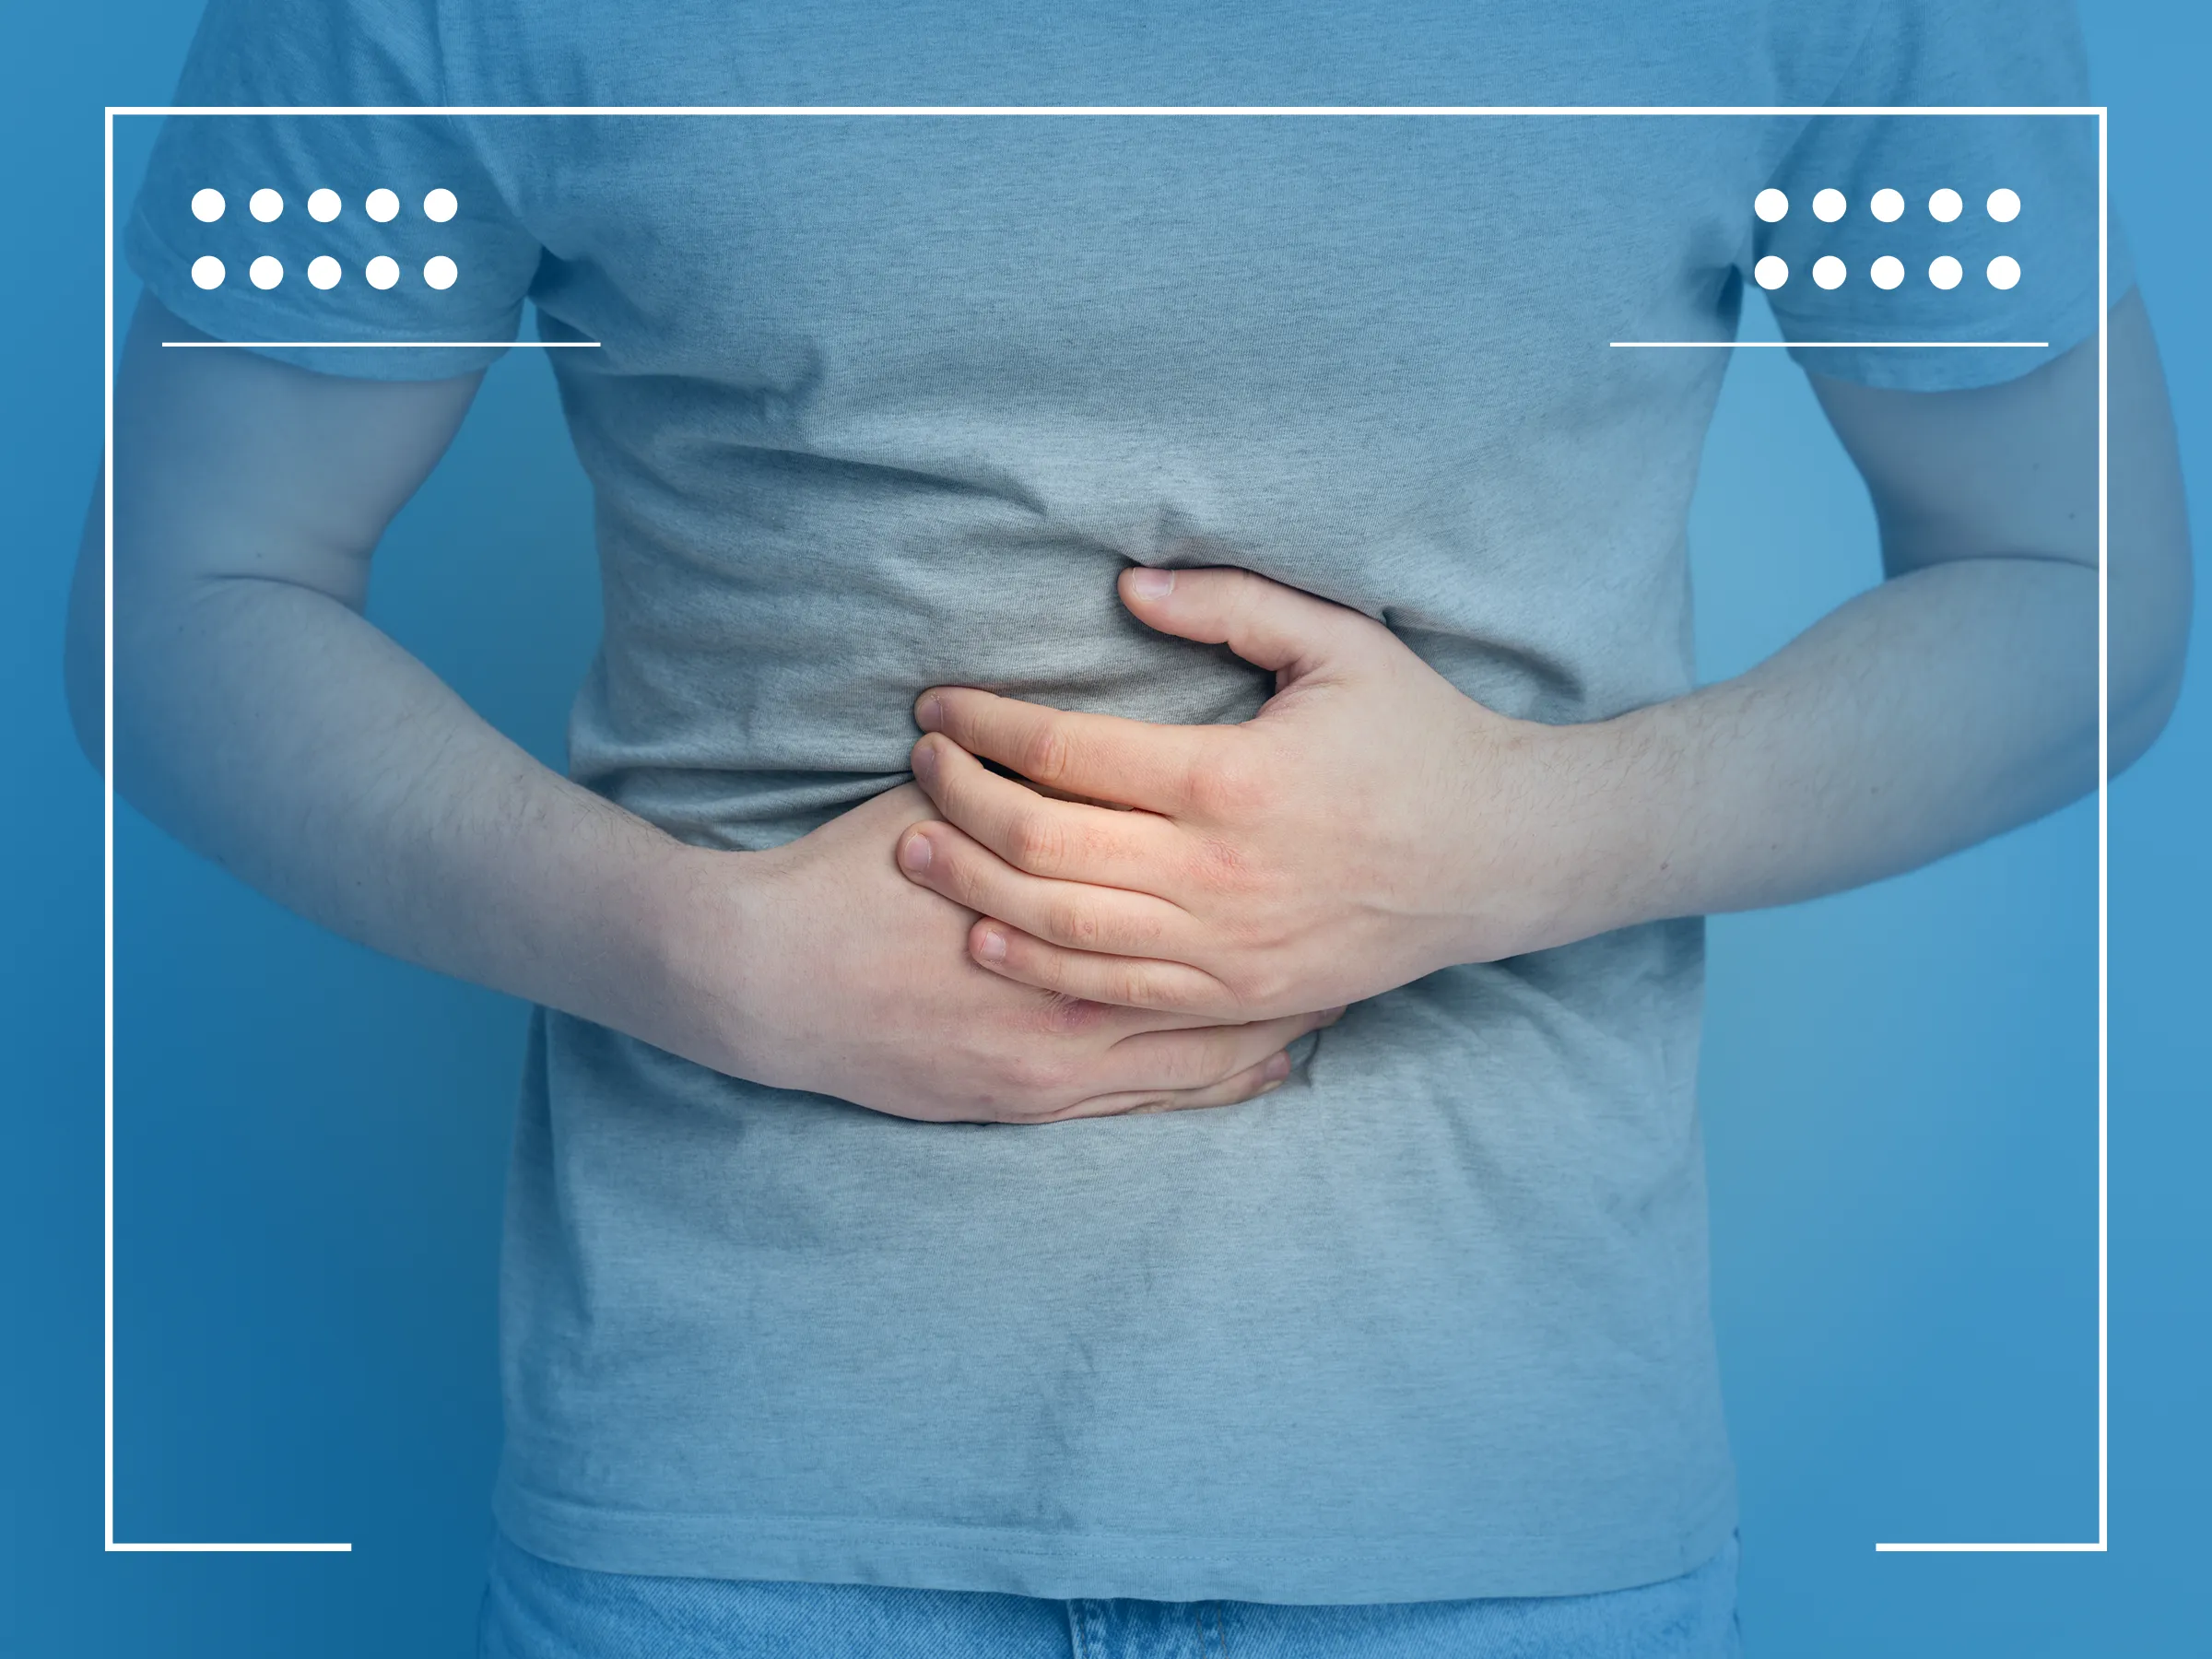 is bowel leakage a sign of cancer